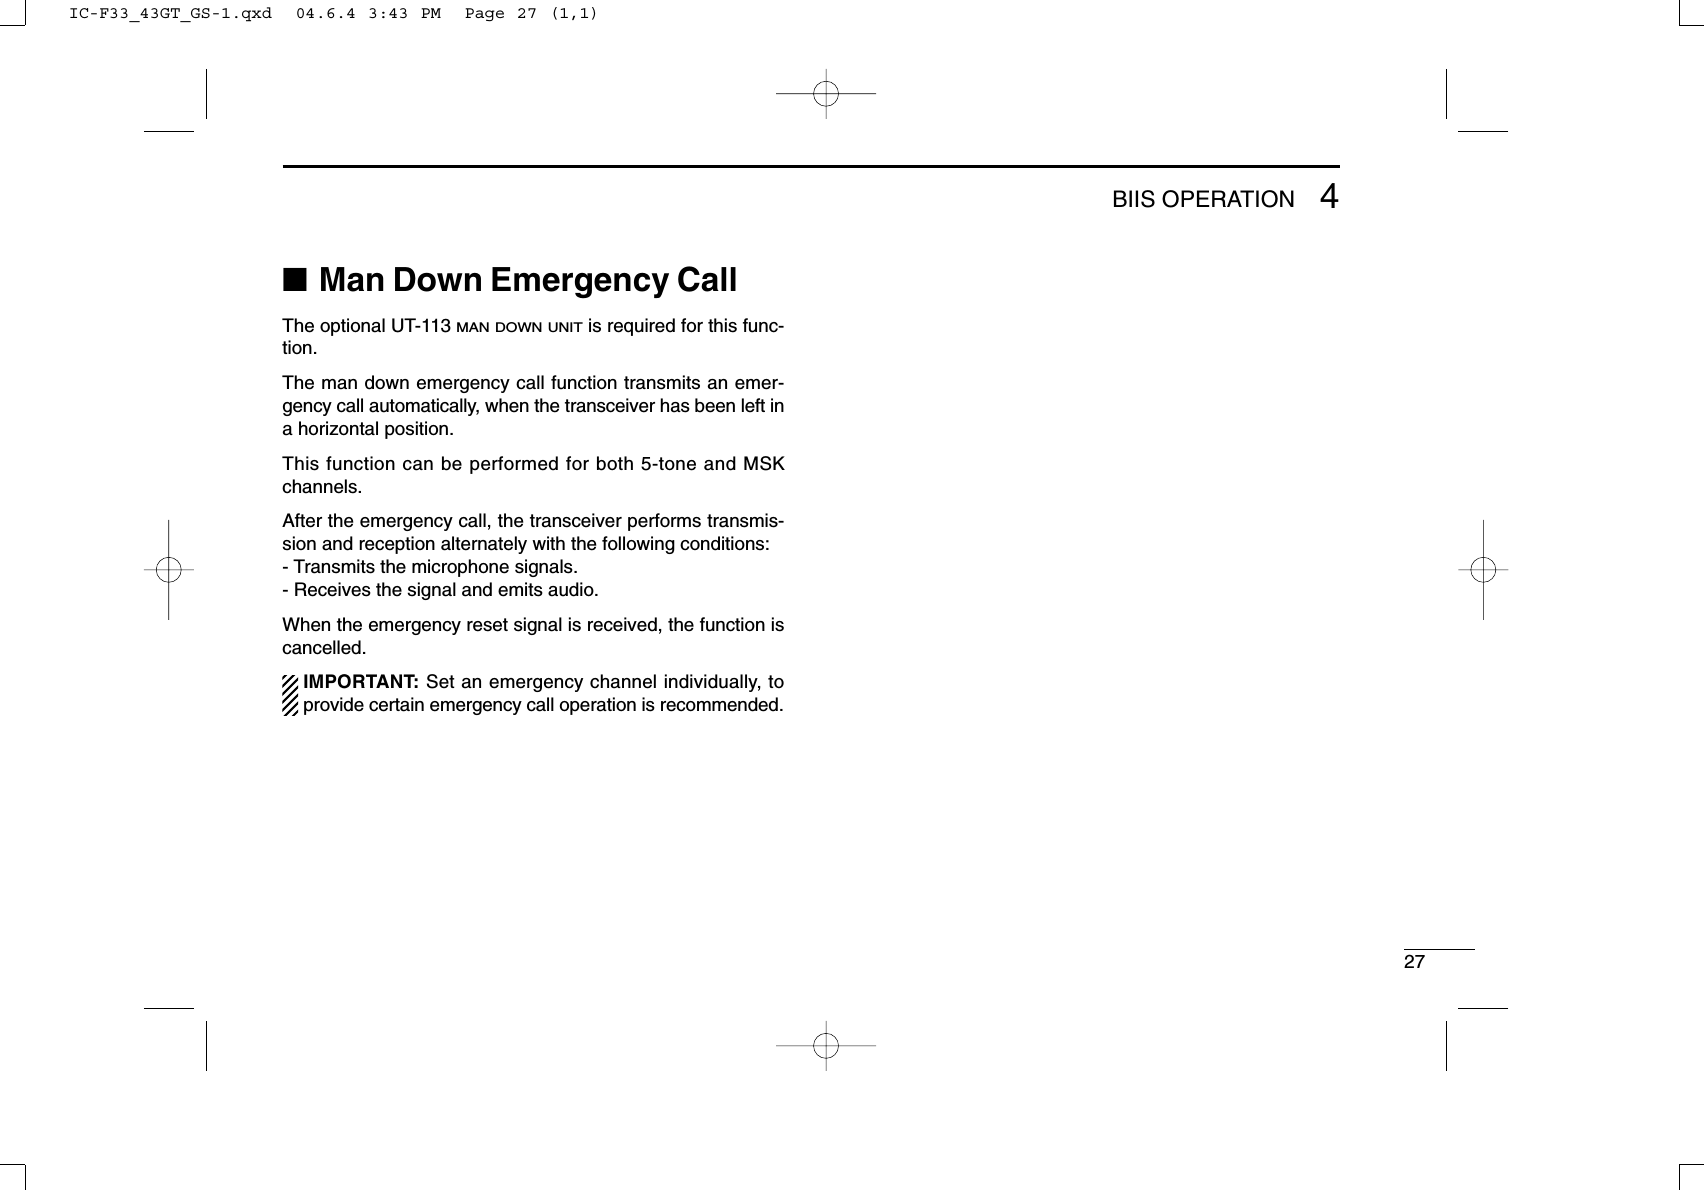 274BIIS OPERATION■Man Down Emergency CallThe optional UT-113 MAN DOWN UNITis required for this func-tion.The man down emergency call function transmits an emer-gency call automatically, when the transceiver has been left ina horizontal position.This function can be performed for both 5-tone and MSKchannels.After the emergency call, the transceiver performs transmis-sion and reception alternately with the following conditions:- Transmits the microphone signals.- Receives the signal and emits audio.When the emergency reset signal is received, the function iscancelled.IMPORTANT: Set an emergency channel individually, toprovide certain emergency call operation is recommended.IC-F33_43GT_GS-1.qxd  04.6.4 3:43 PM  Page 27 (1,1)